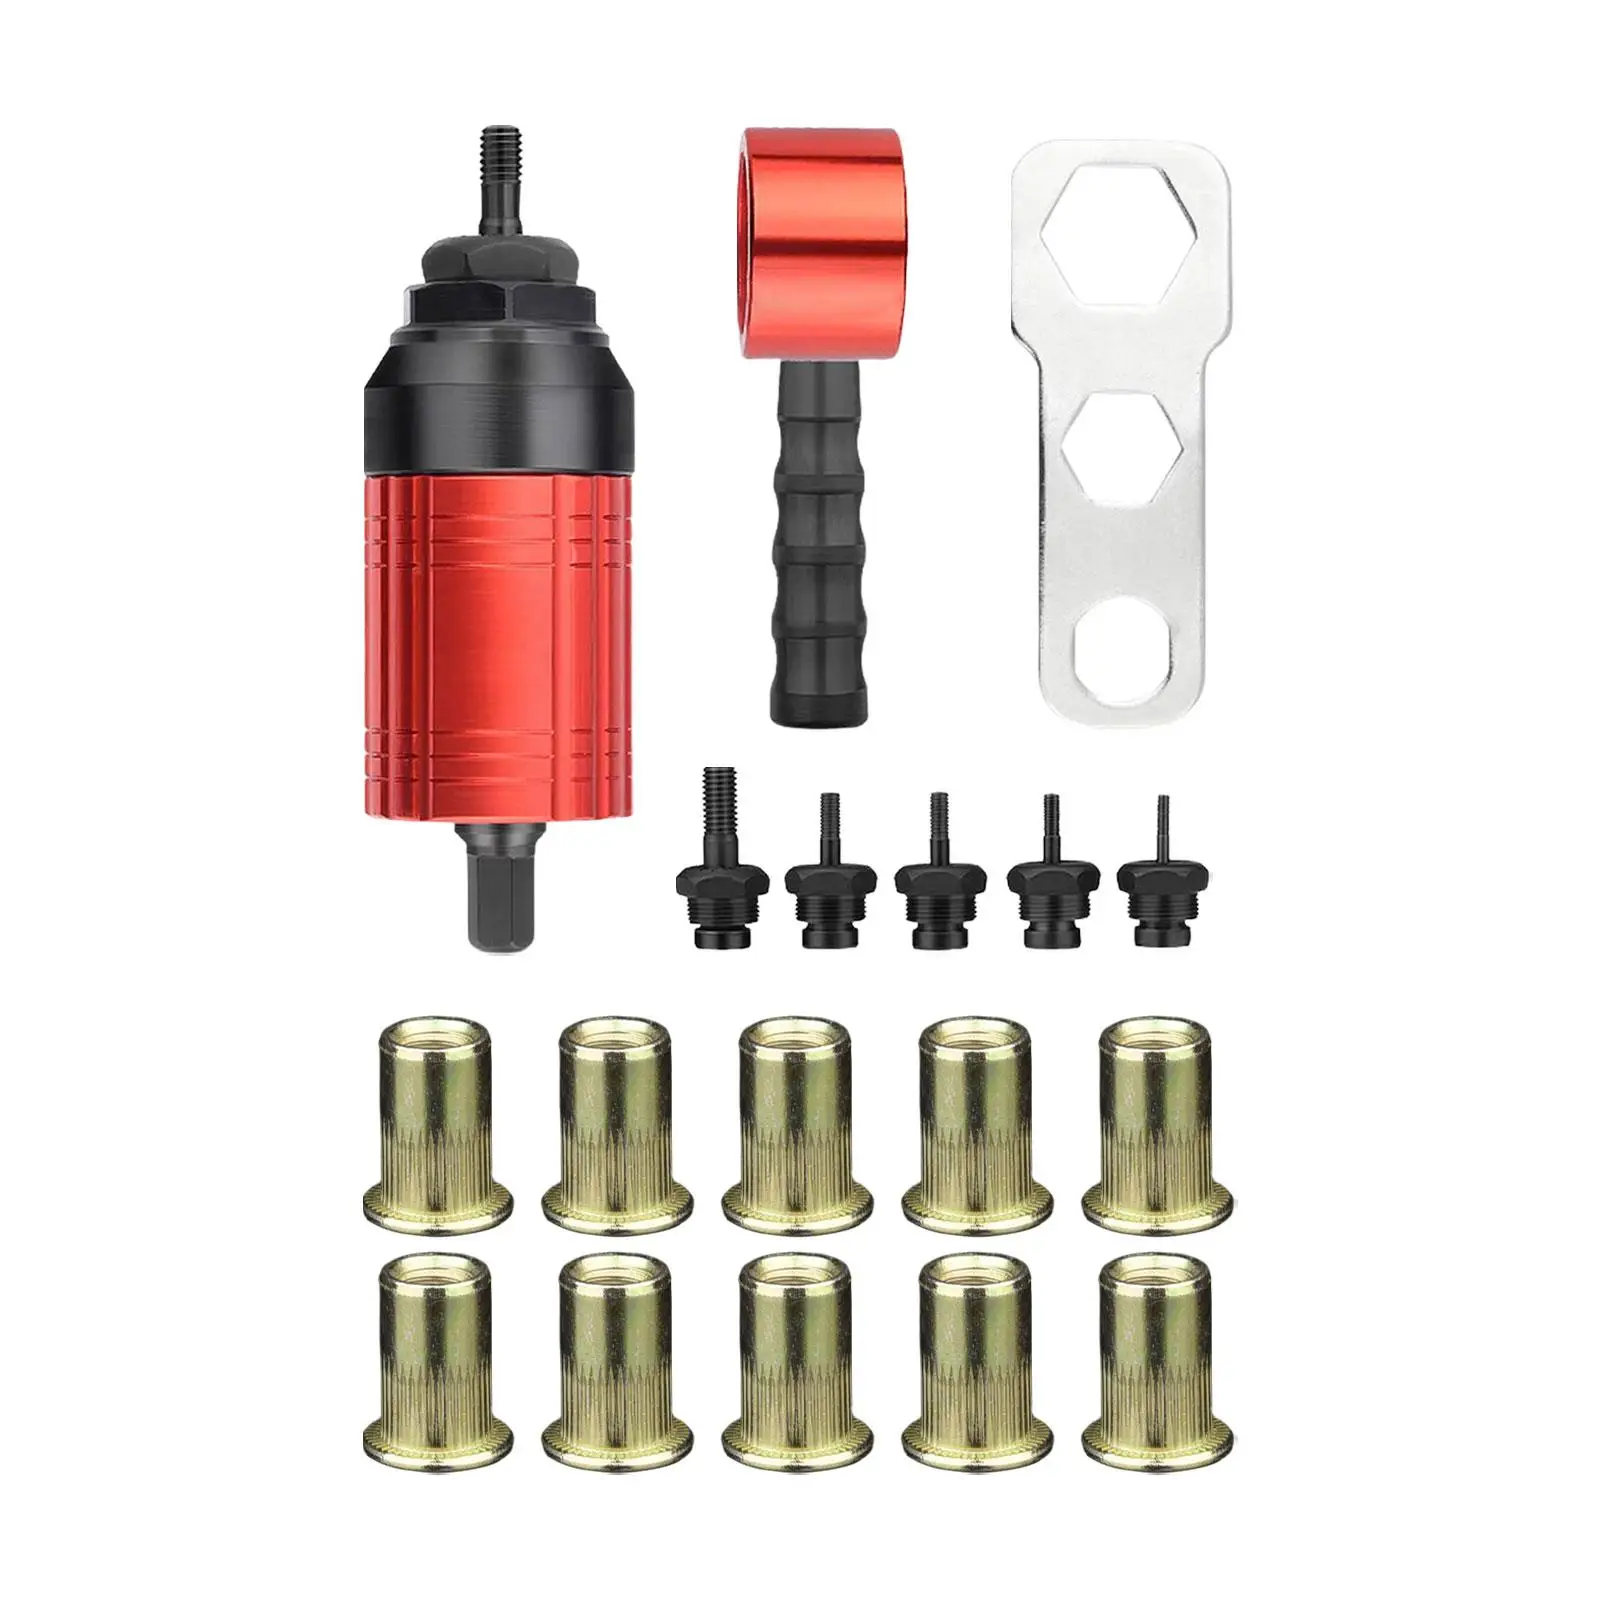 Rivet Nut Drill Adaptor with 10 Rivet Nuts Threaded Insert Installation Tool for Ship Repair Car Electrical Appliance Furniture